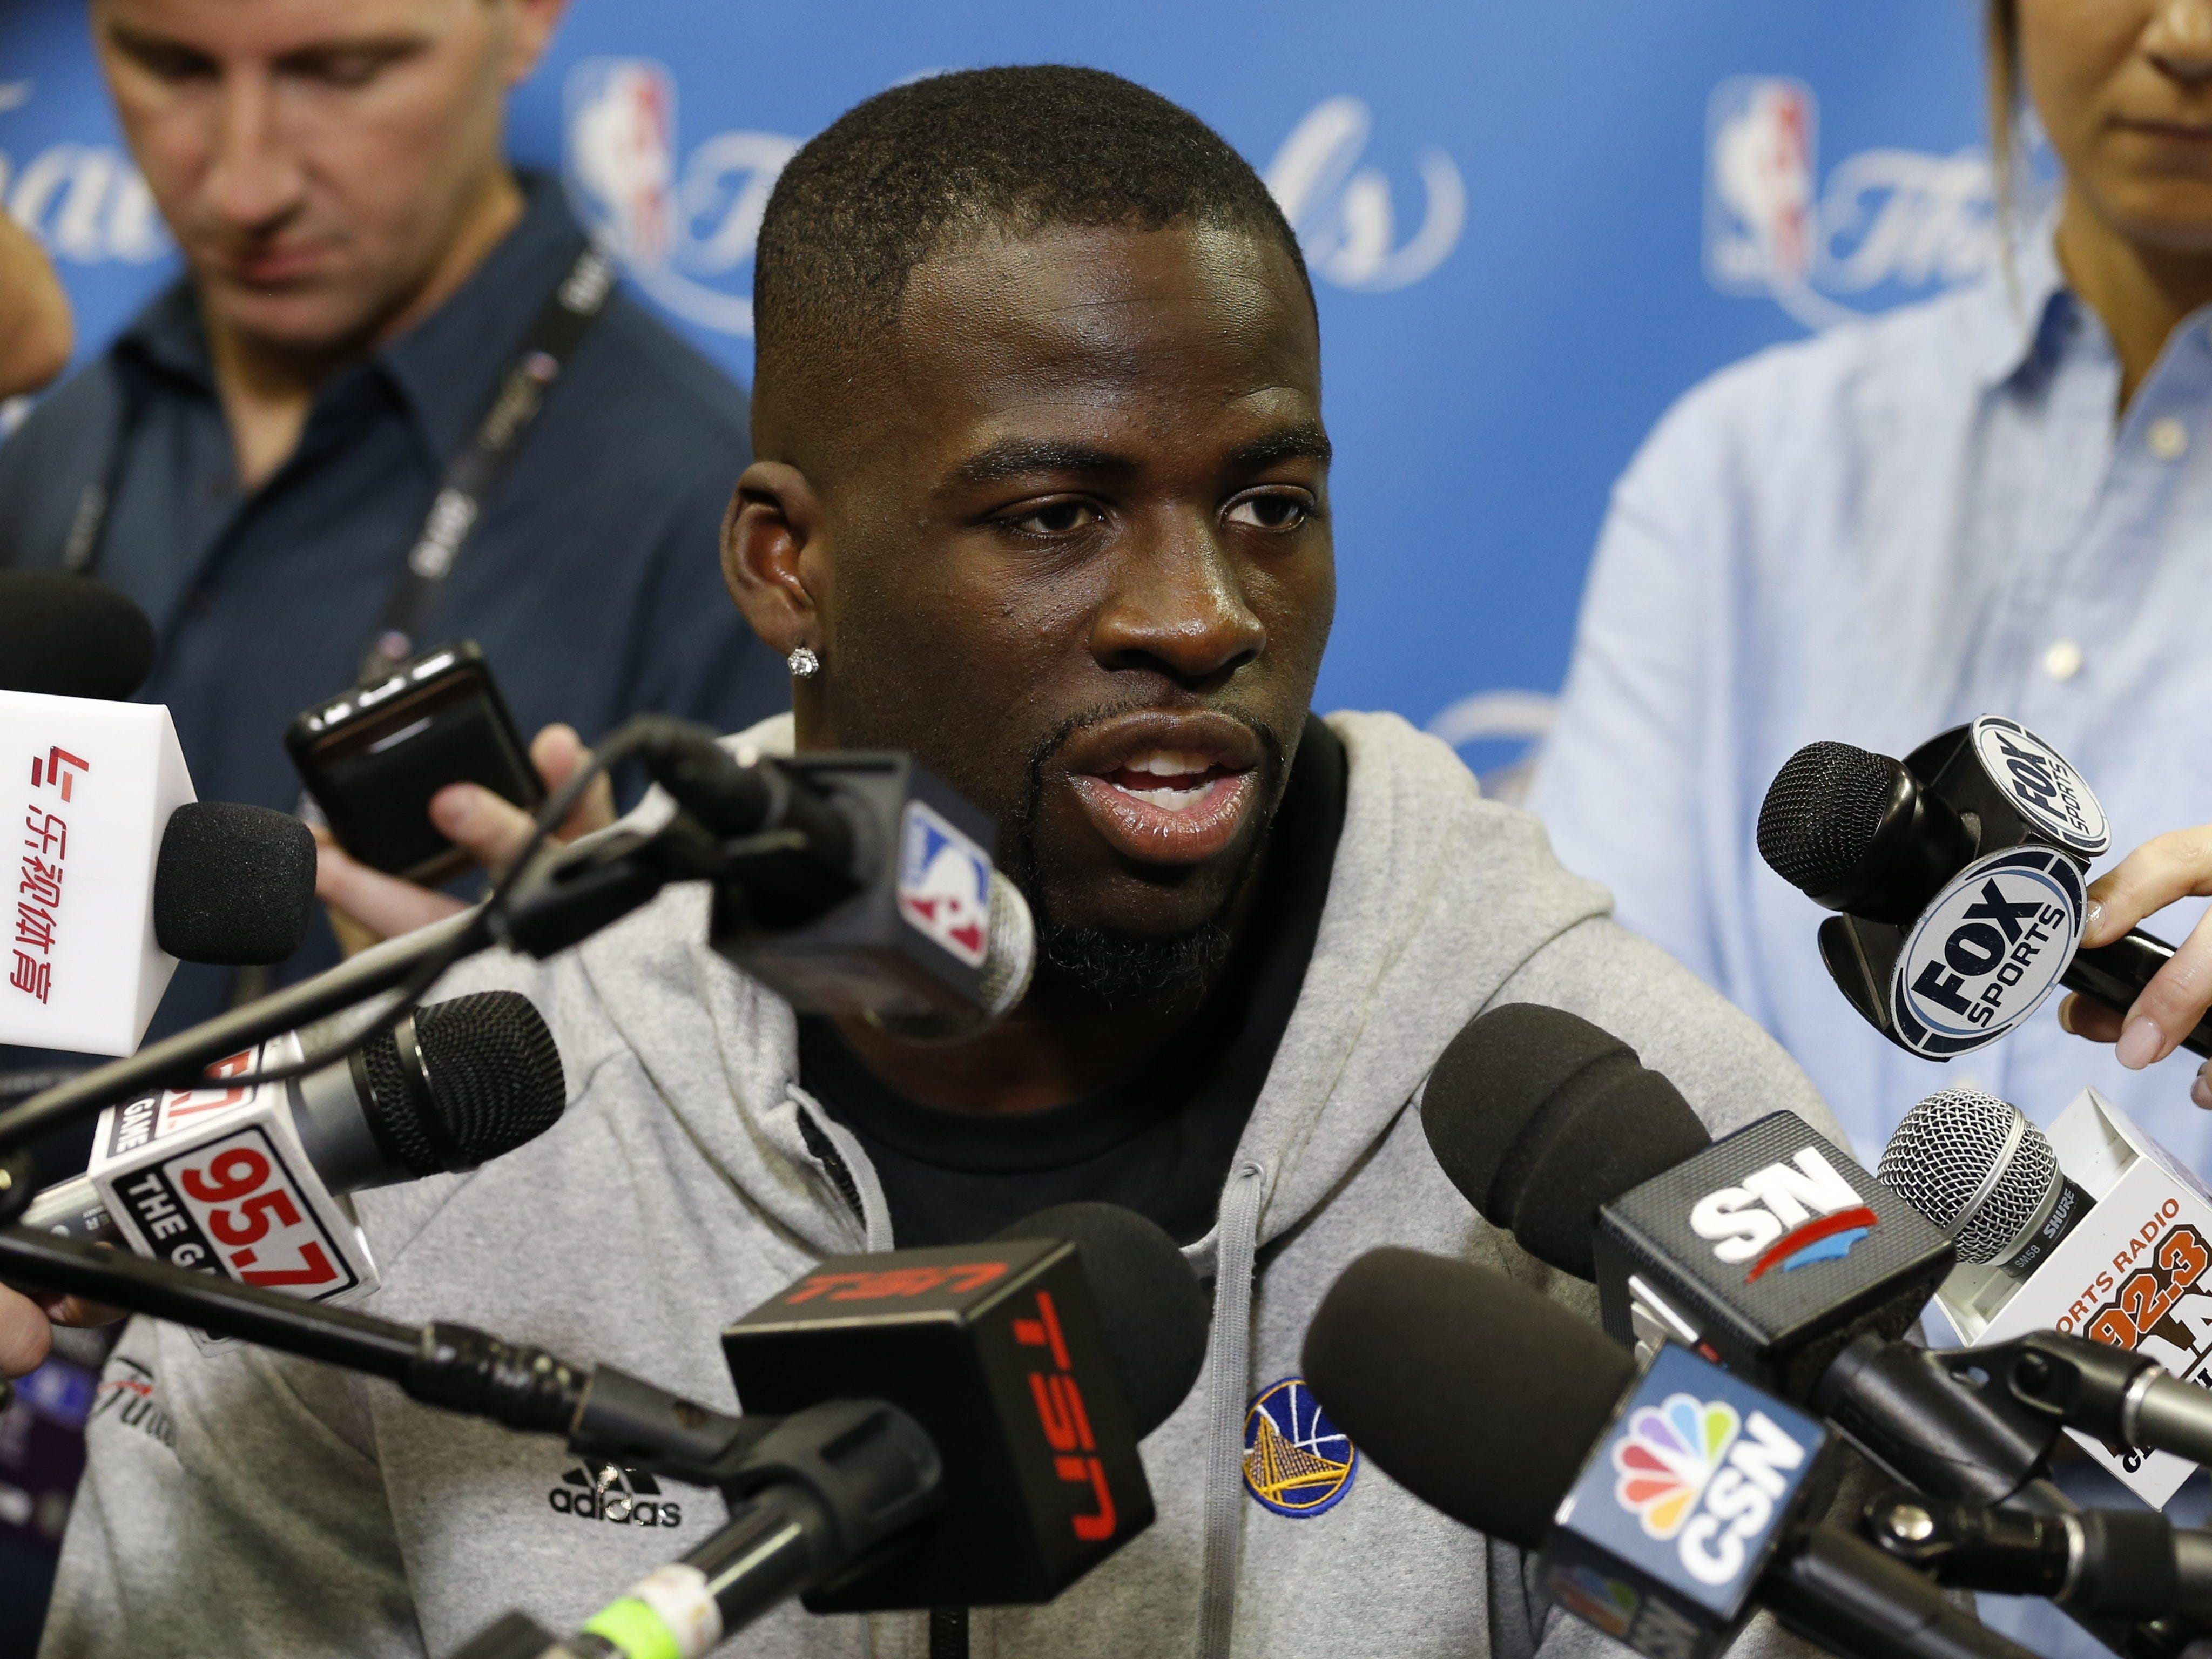 Golden State Warriors forward Draymond Green told reporters that he was a ‘terrible teammate’ for allowing himself to get suspended for Game 5 of the NBA Finals. He vowed to make up for it in Game 6.